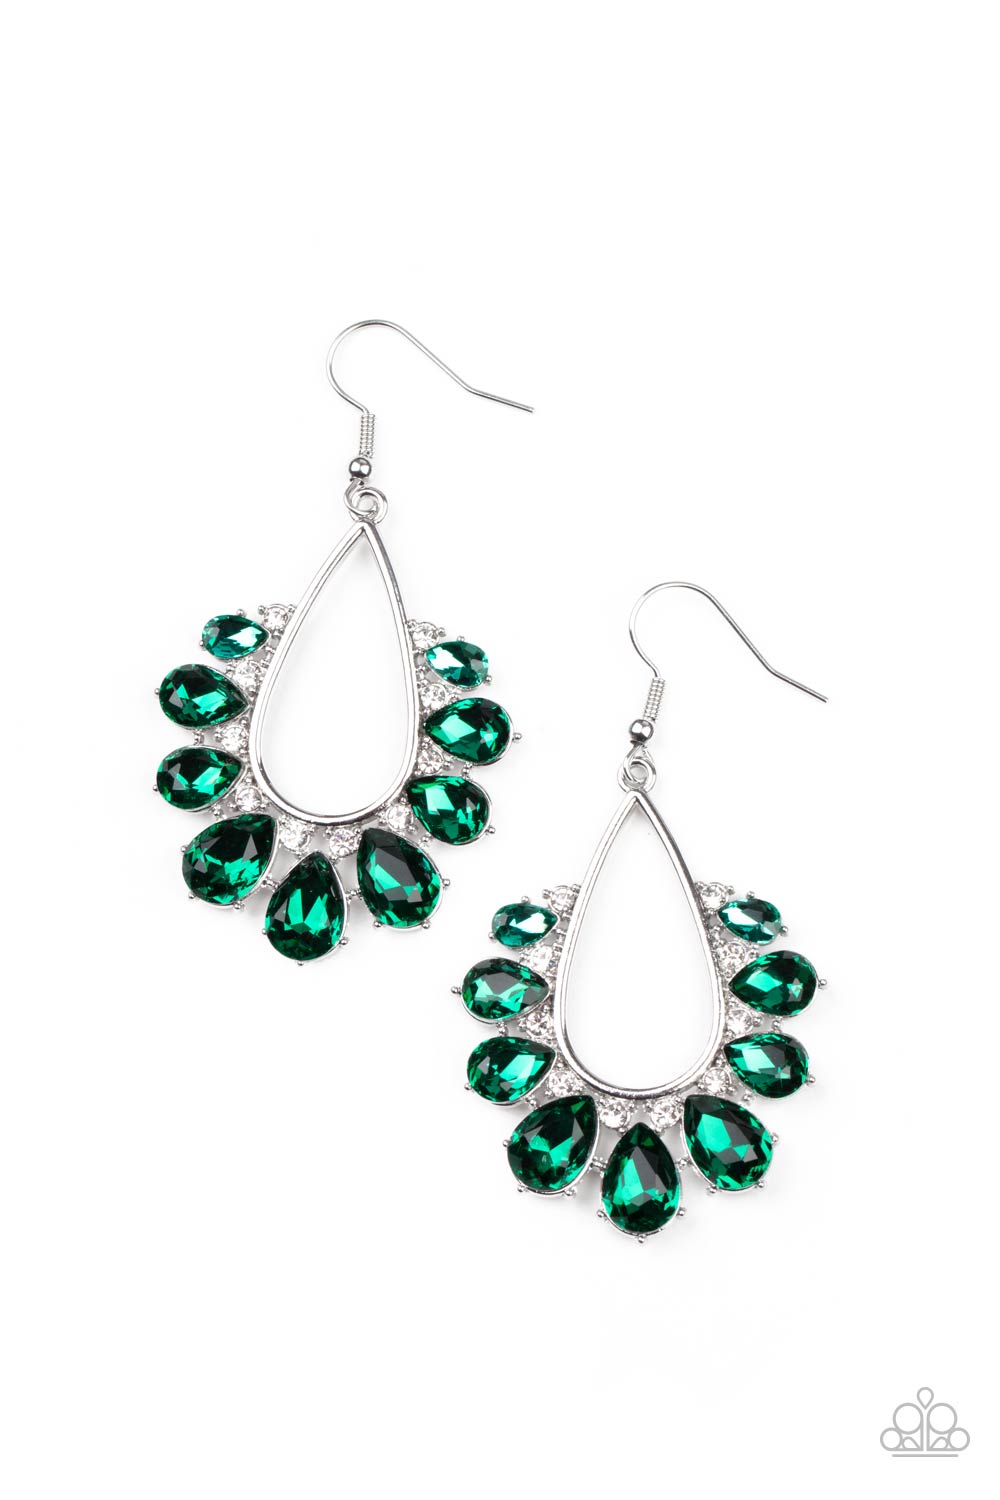 Paparazzi Accessories Two Can Play That Game - Green Earrings - Lady T Accessories